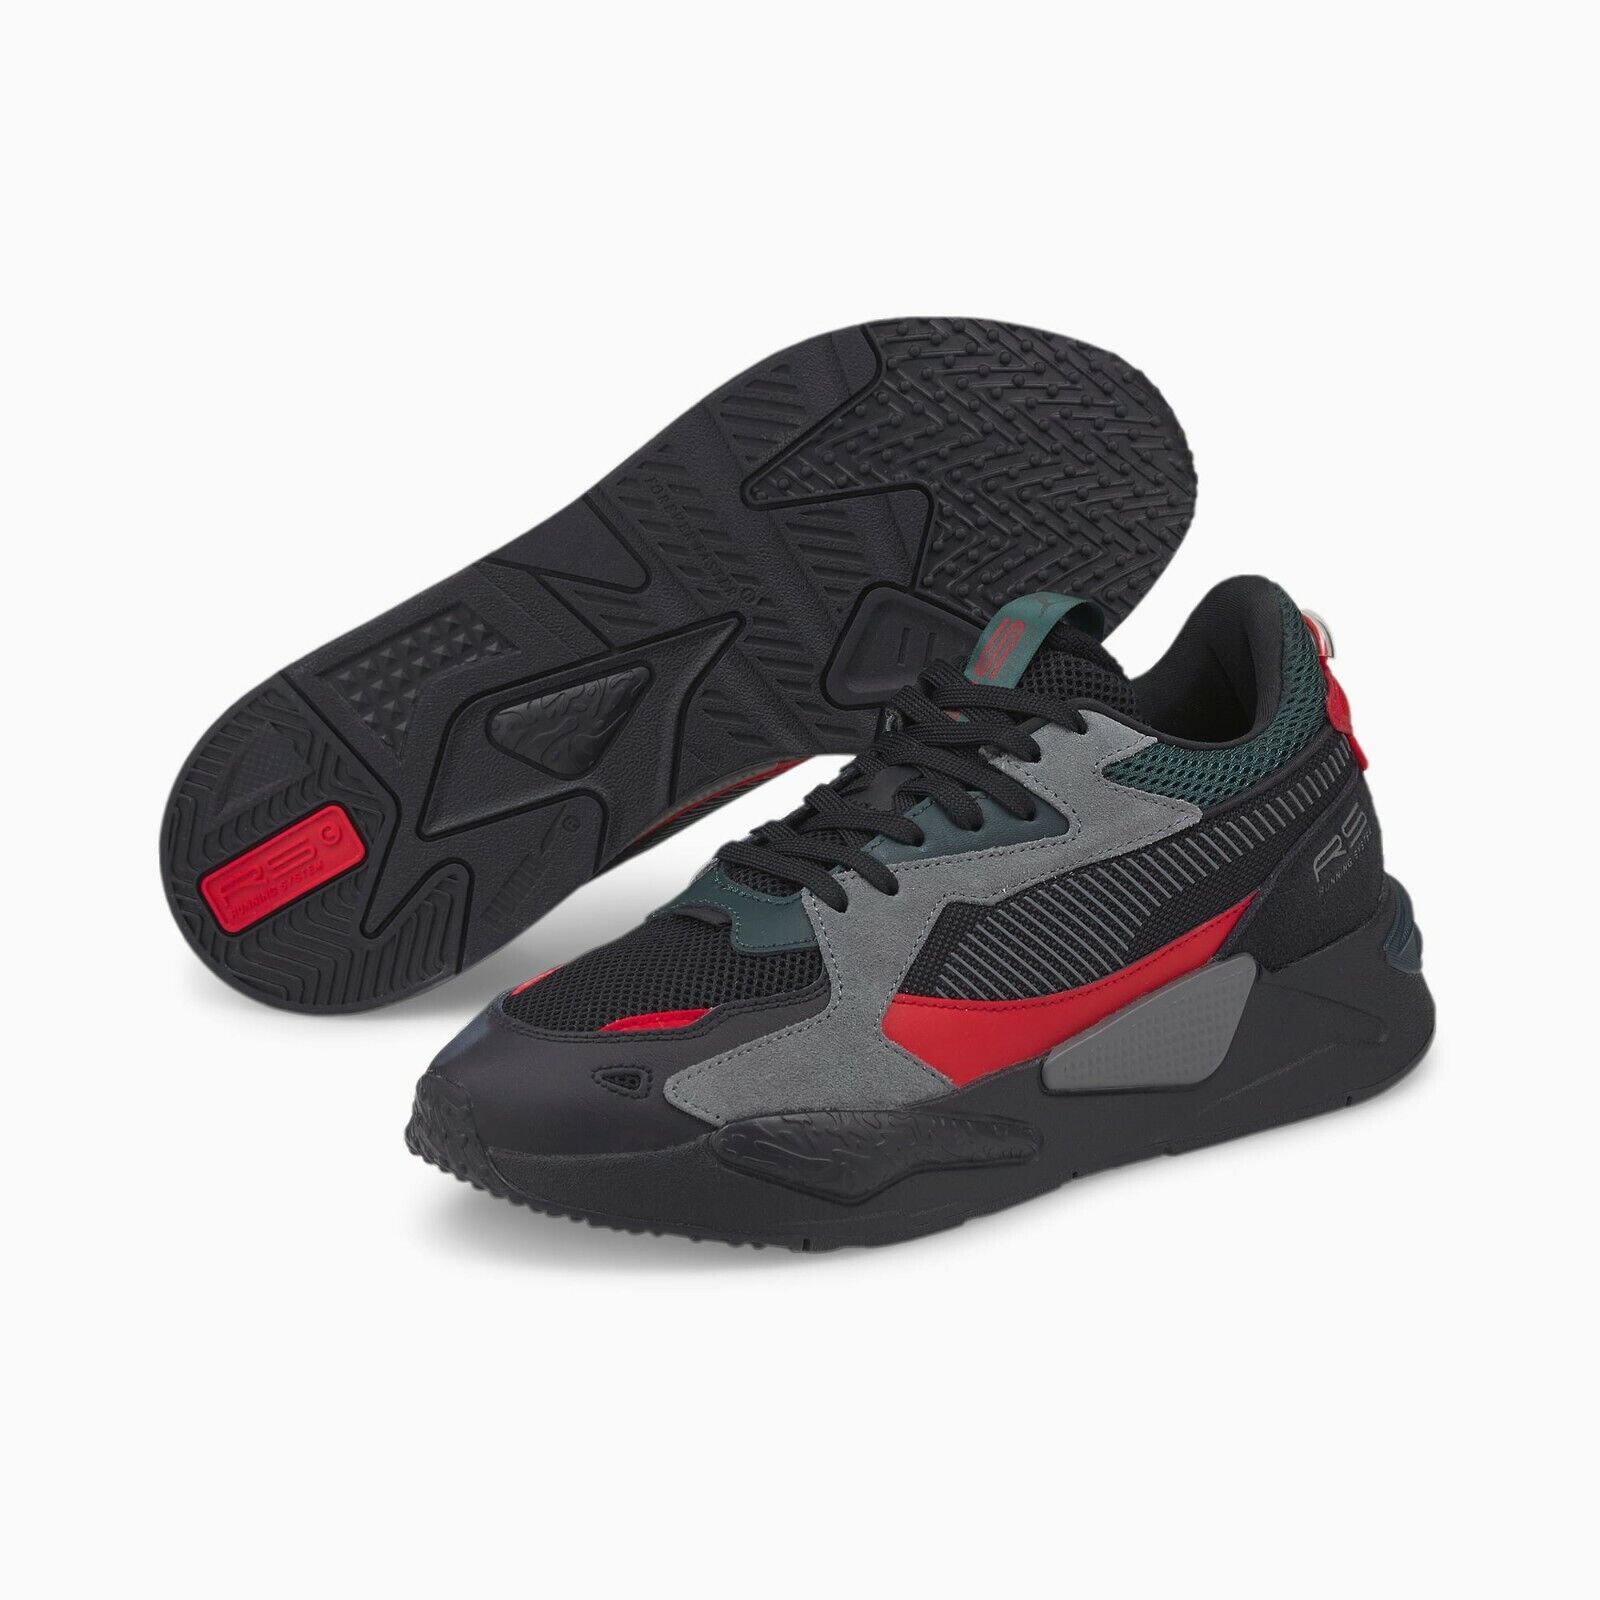 Puma RS-Z Shoes LifeStyle Sneakers Black/Castlerock/Urban Red 381640-08 US  4-12